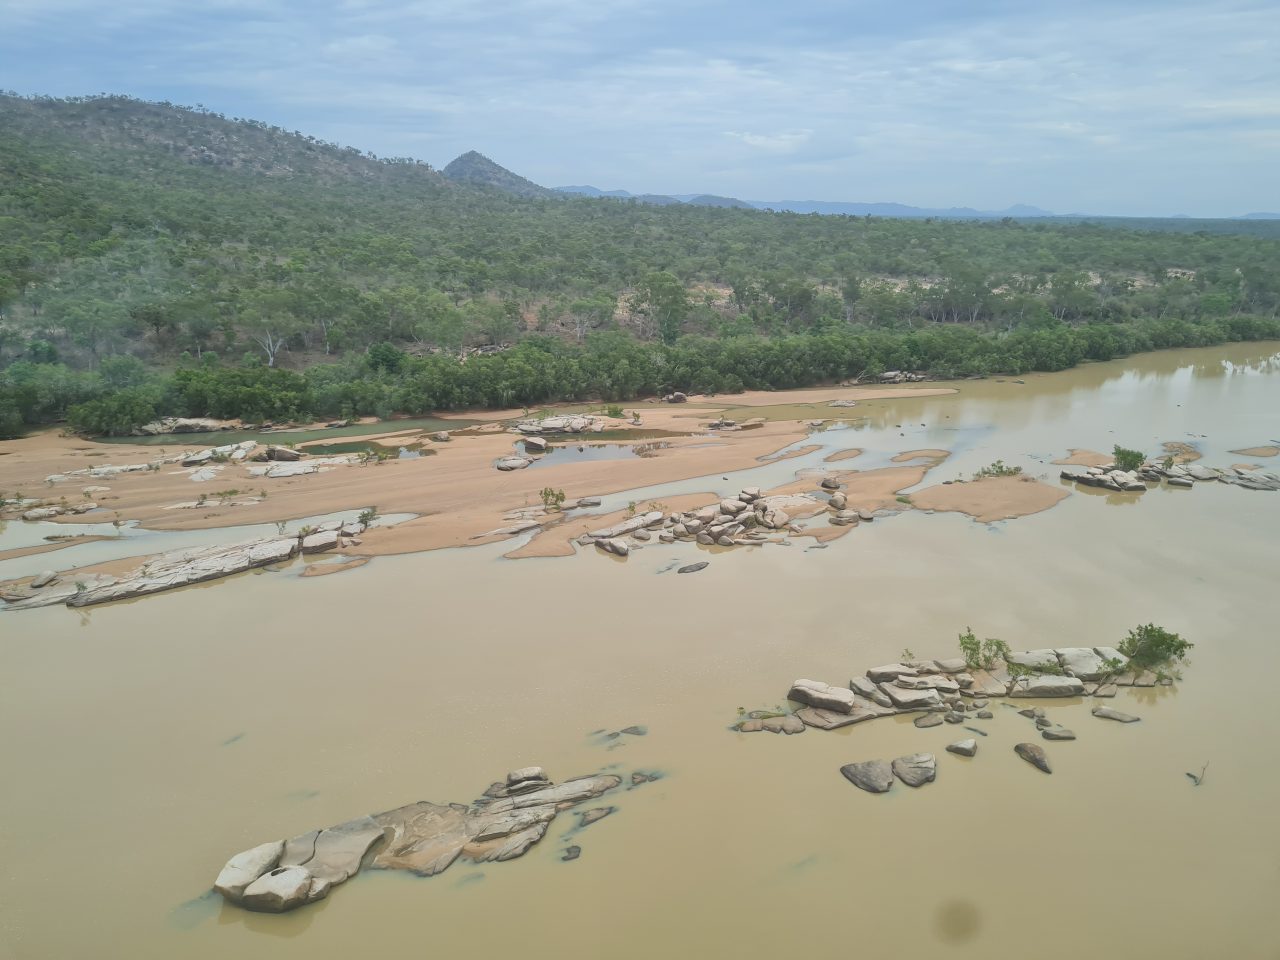 Aerial photo of river with brown water, sand formations and rocky outcrops running next to a naturally vegetated hill. Mountains in the background and on a cloudy day.